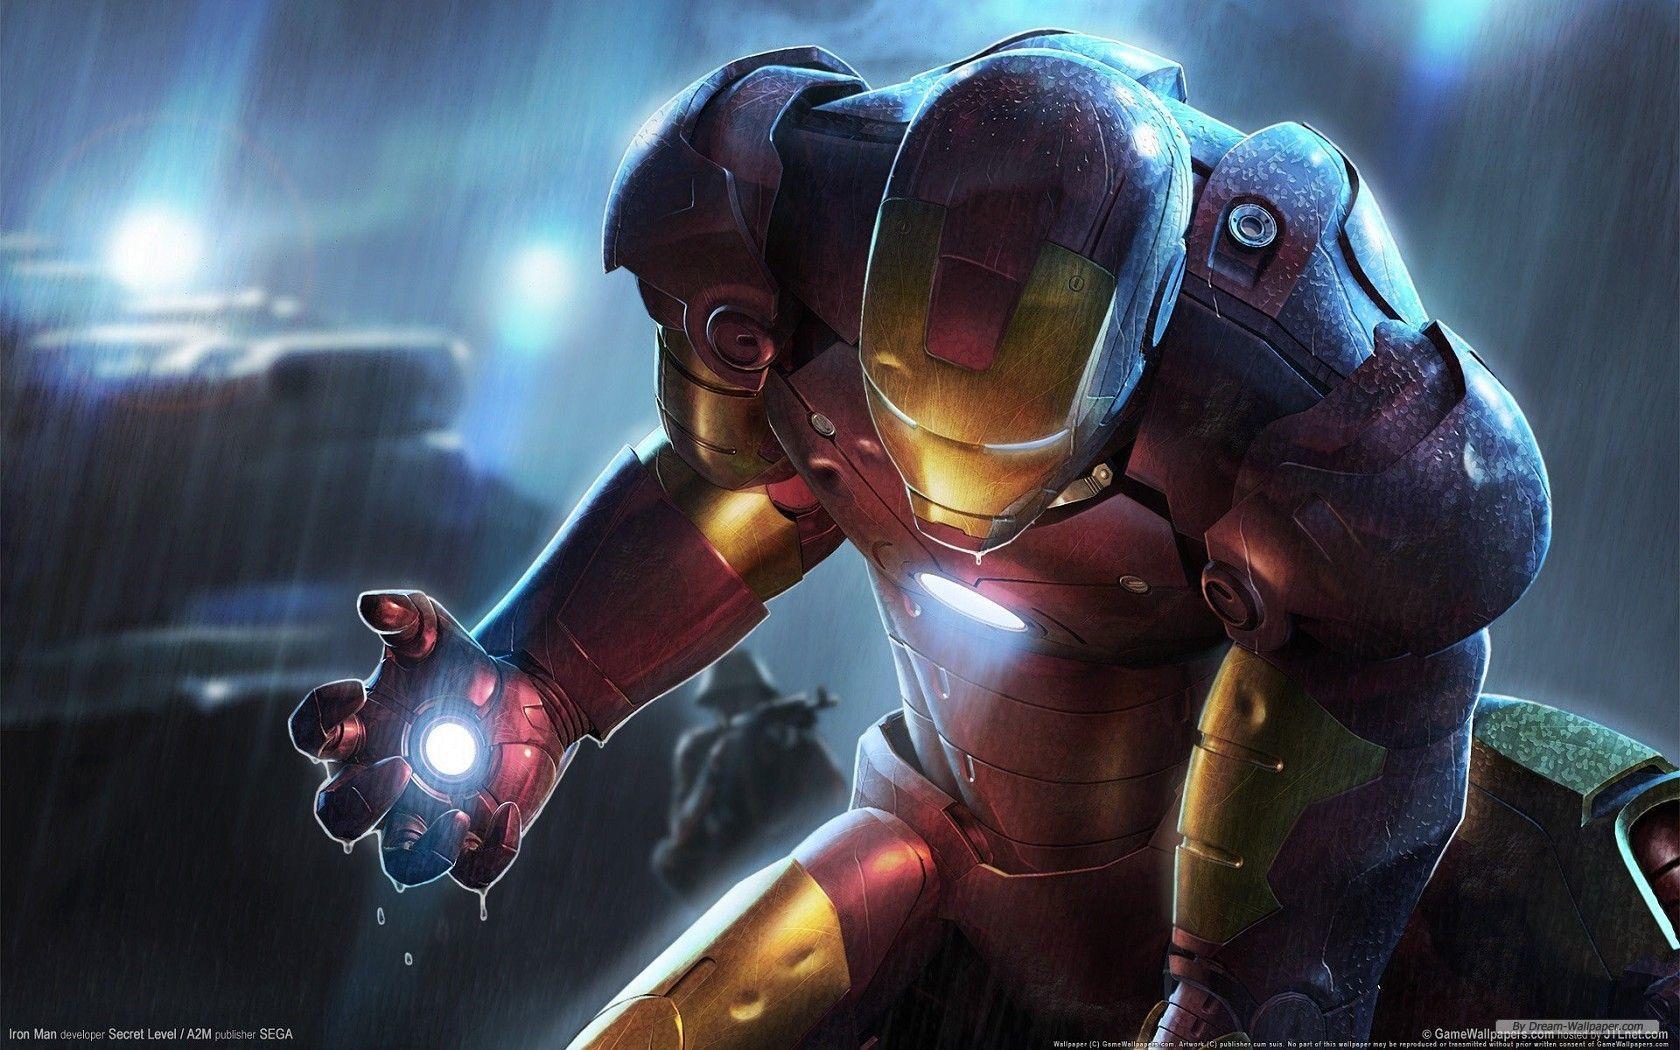 Cool Iron Man pictures.jpg